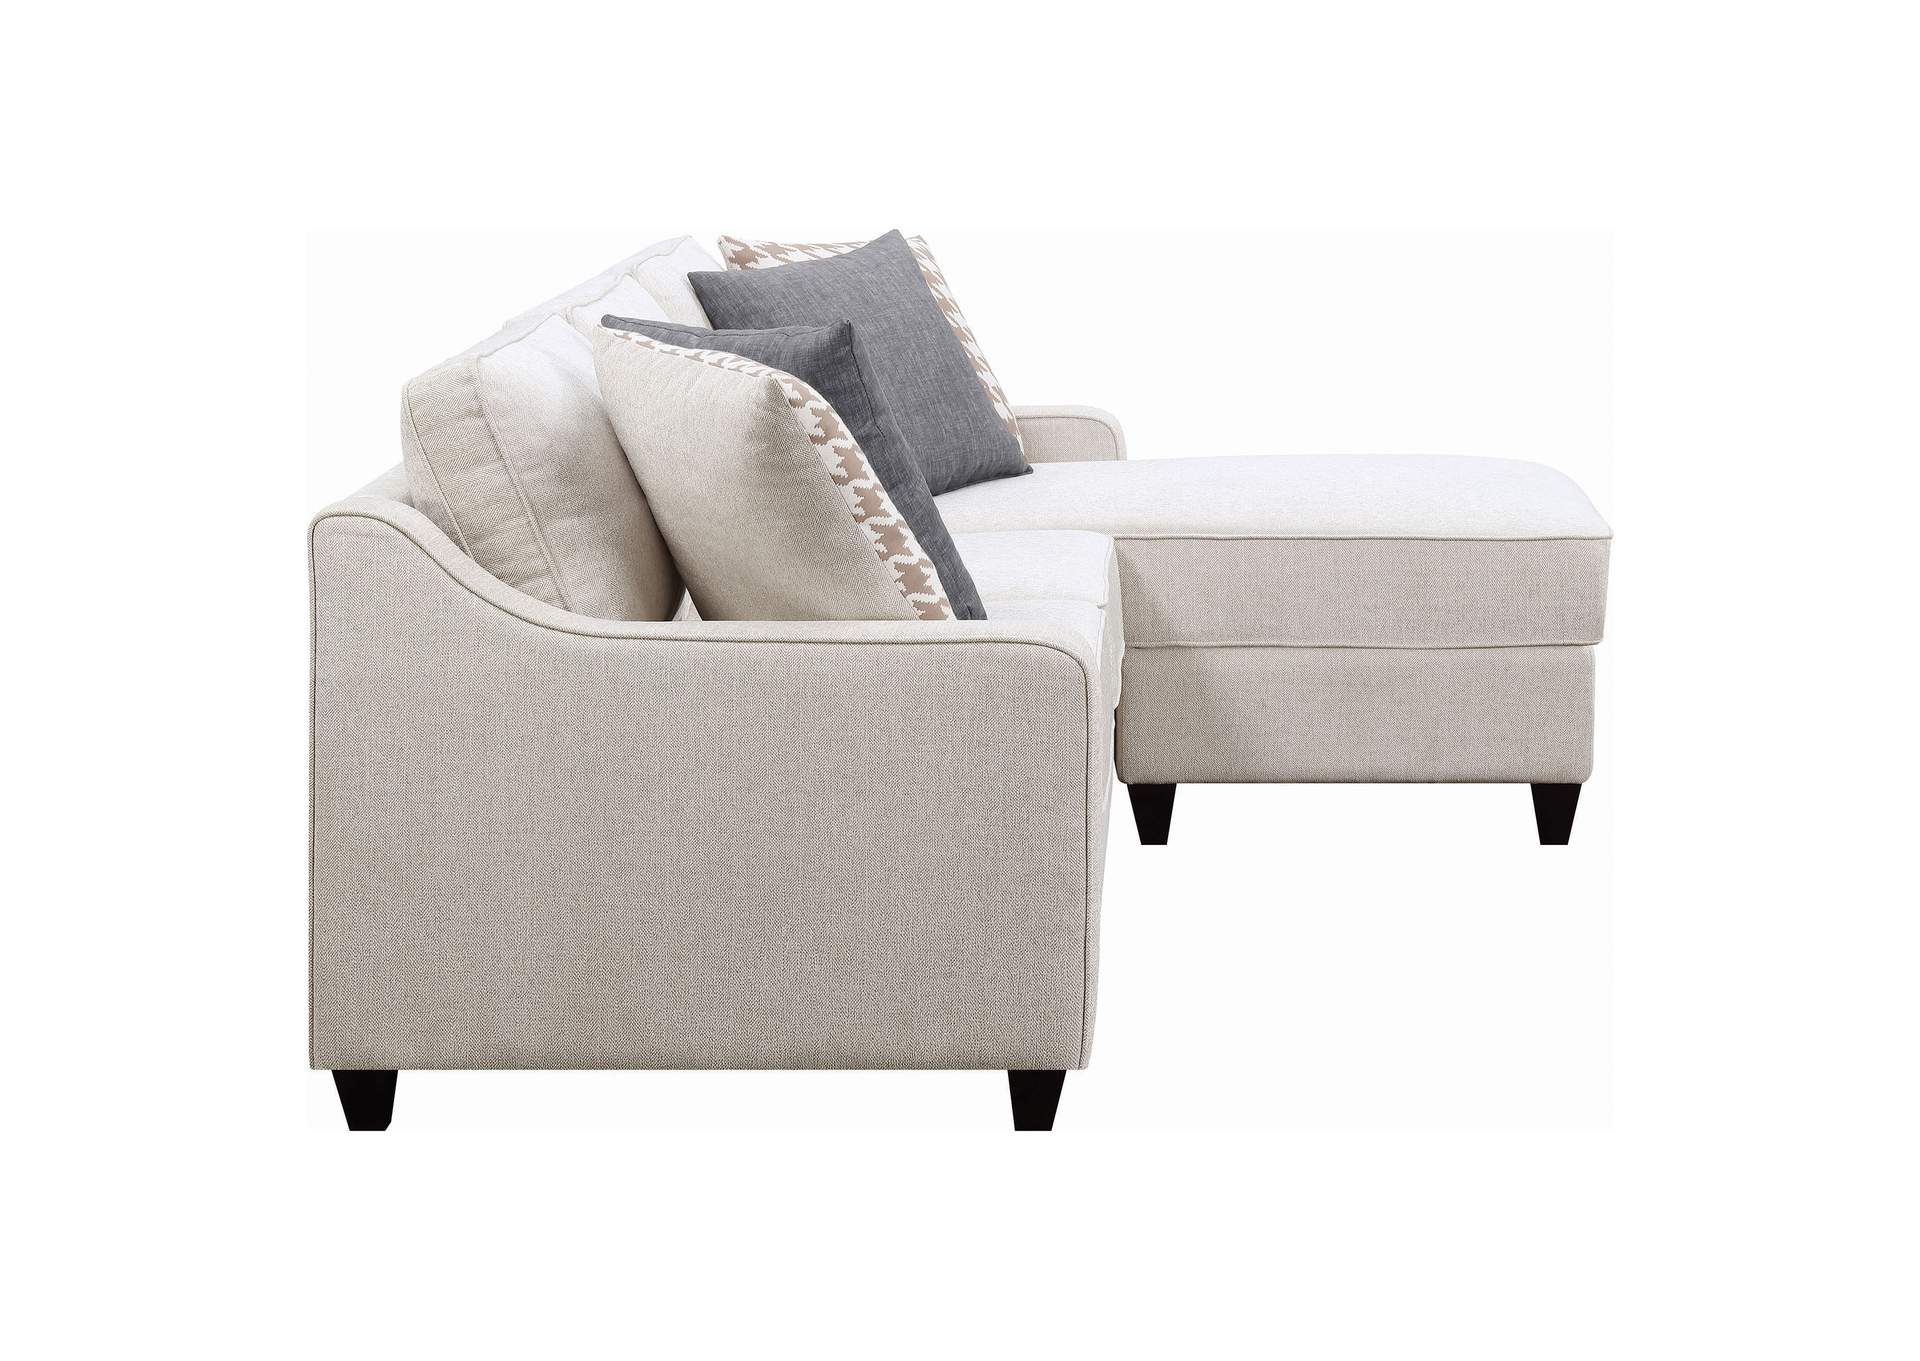 McLoughlin Upholstered Sectional Cream,Coaster Furniture